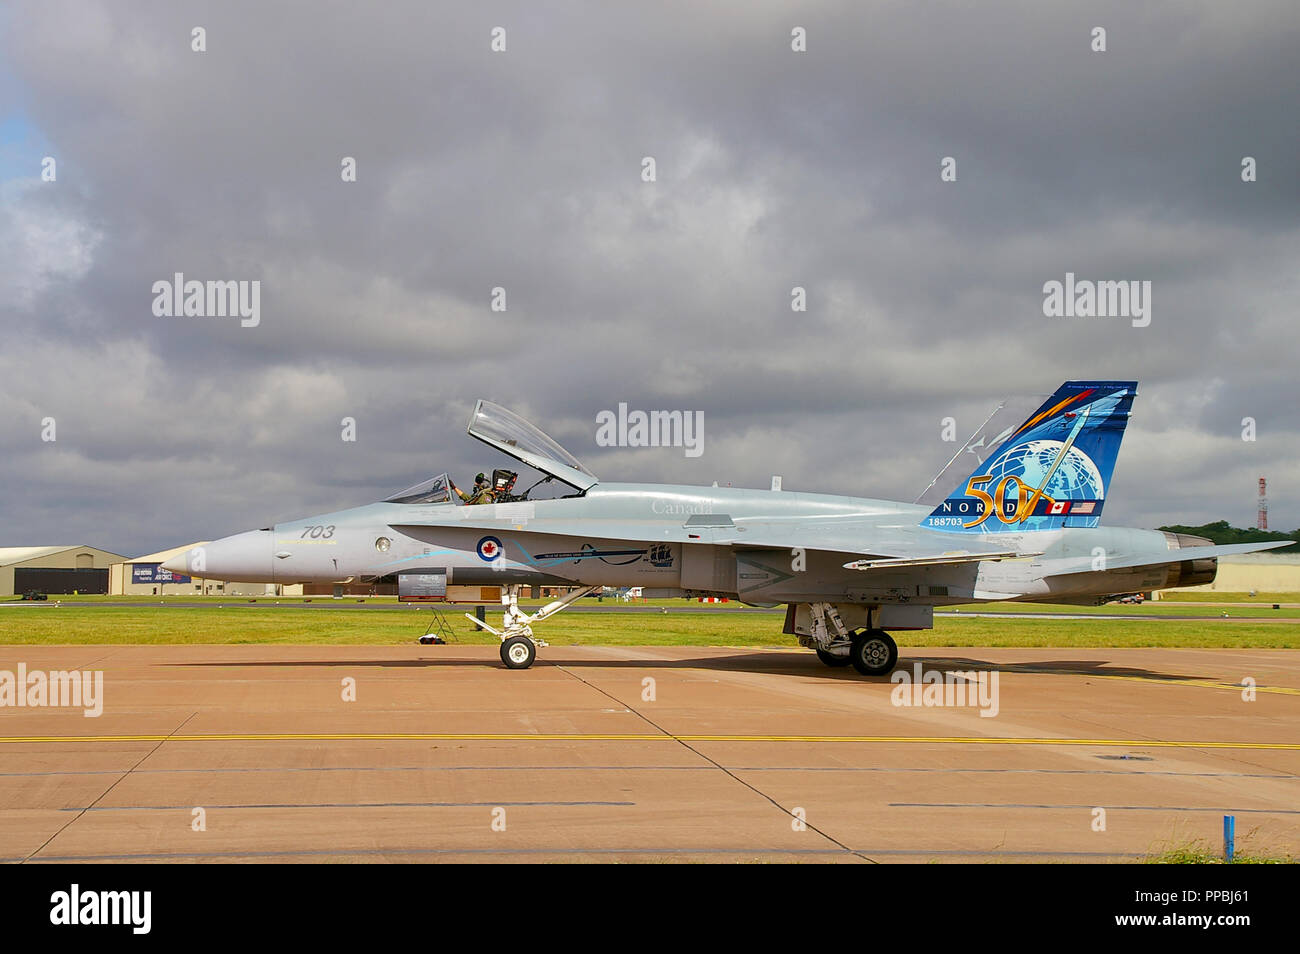 Royal Canadian Air Force, Canadian Armed Forces McDonnell Douglas CF-188A Hornet aus 4 Wing Cold Lake mit NORAD-Speziallackierung Stockfoto